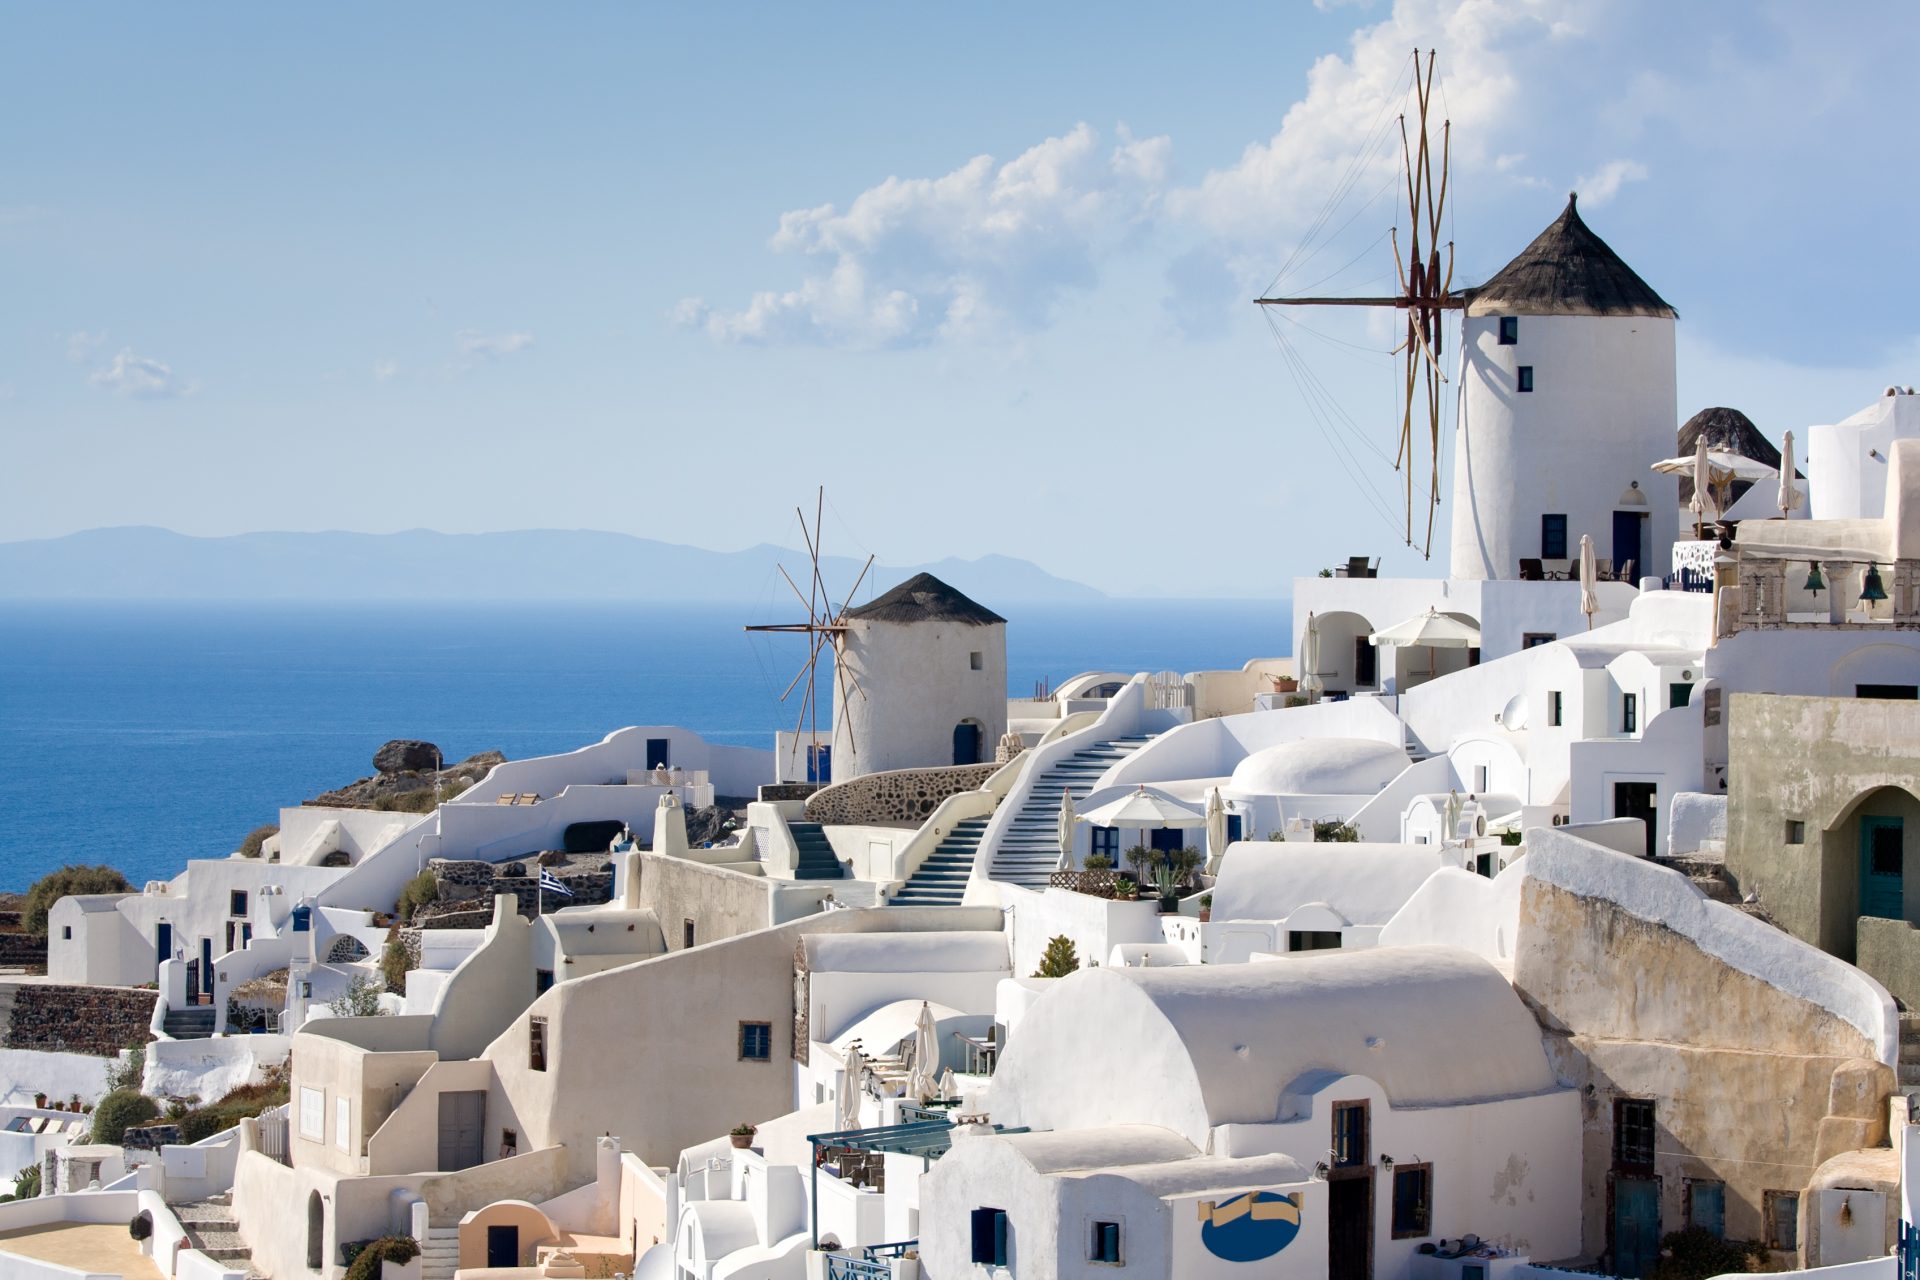 Old-style,White,Traditional,Windmills,In,Terraced,Village,Oia,Of,Cyclades